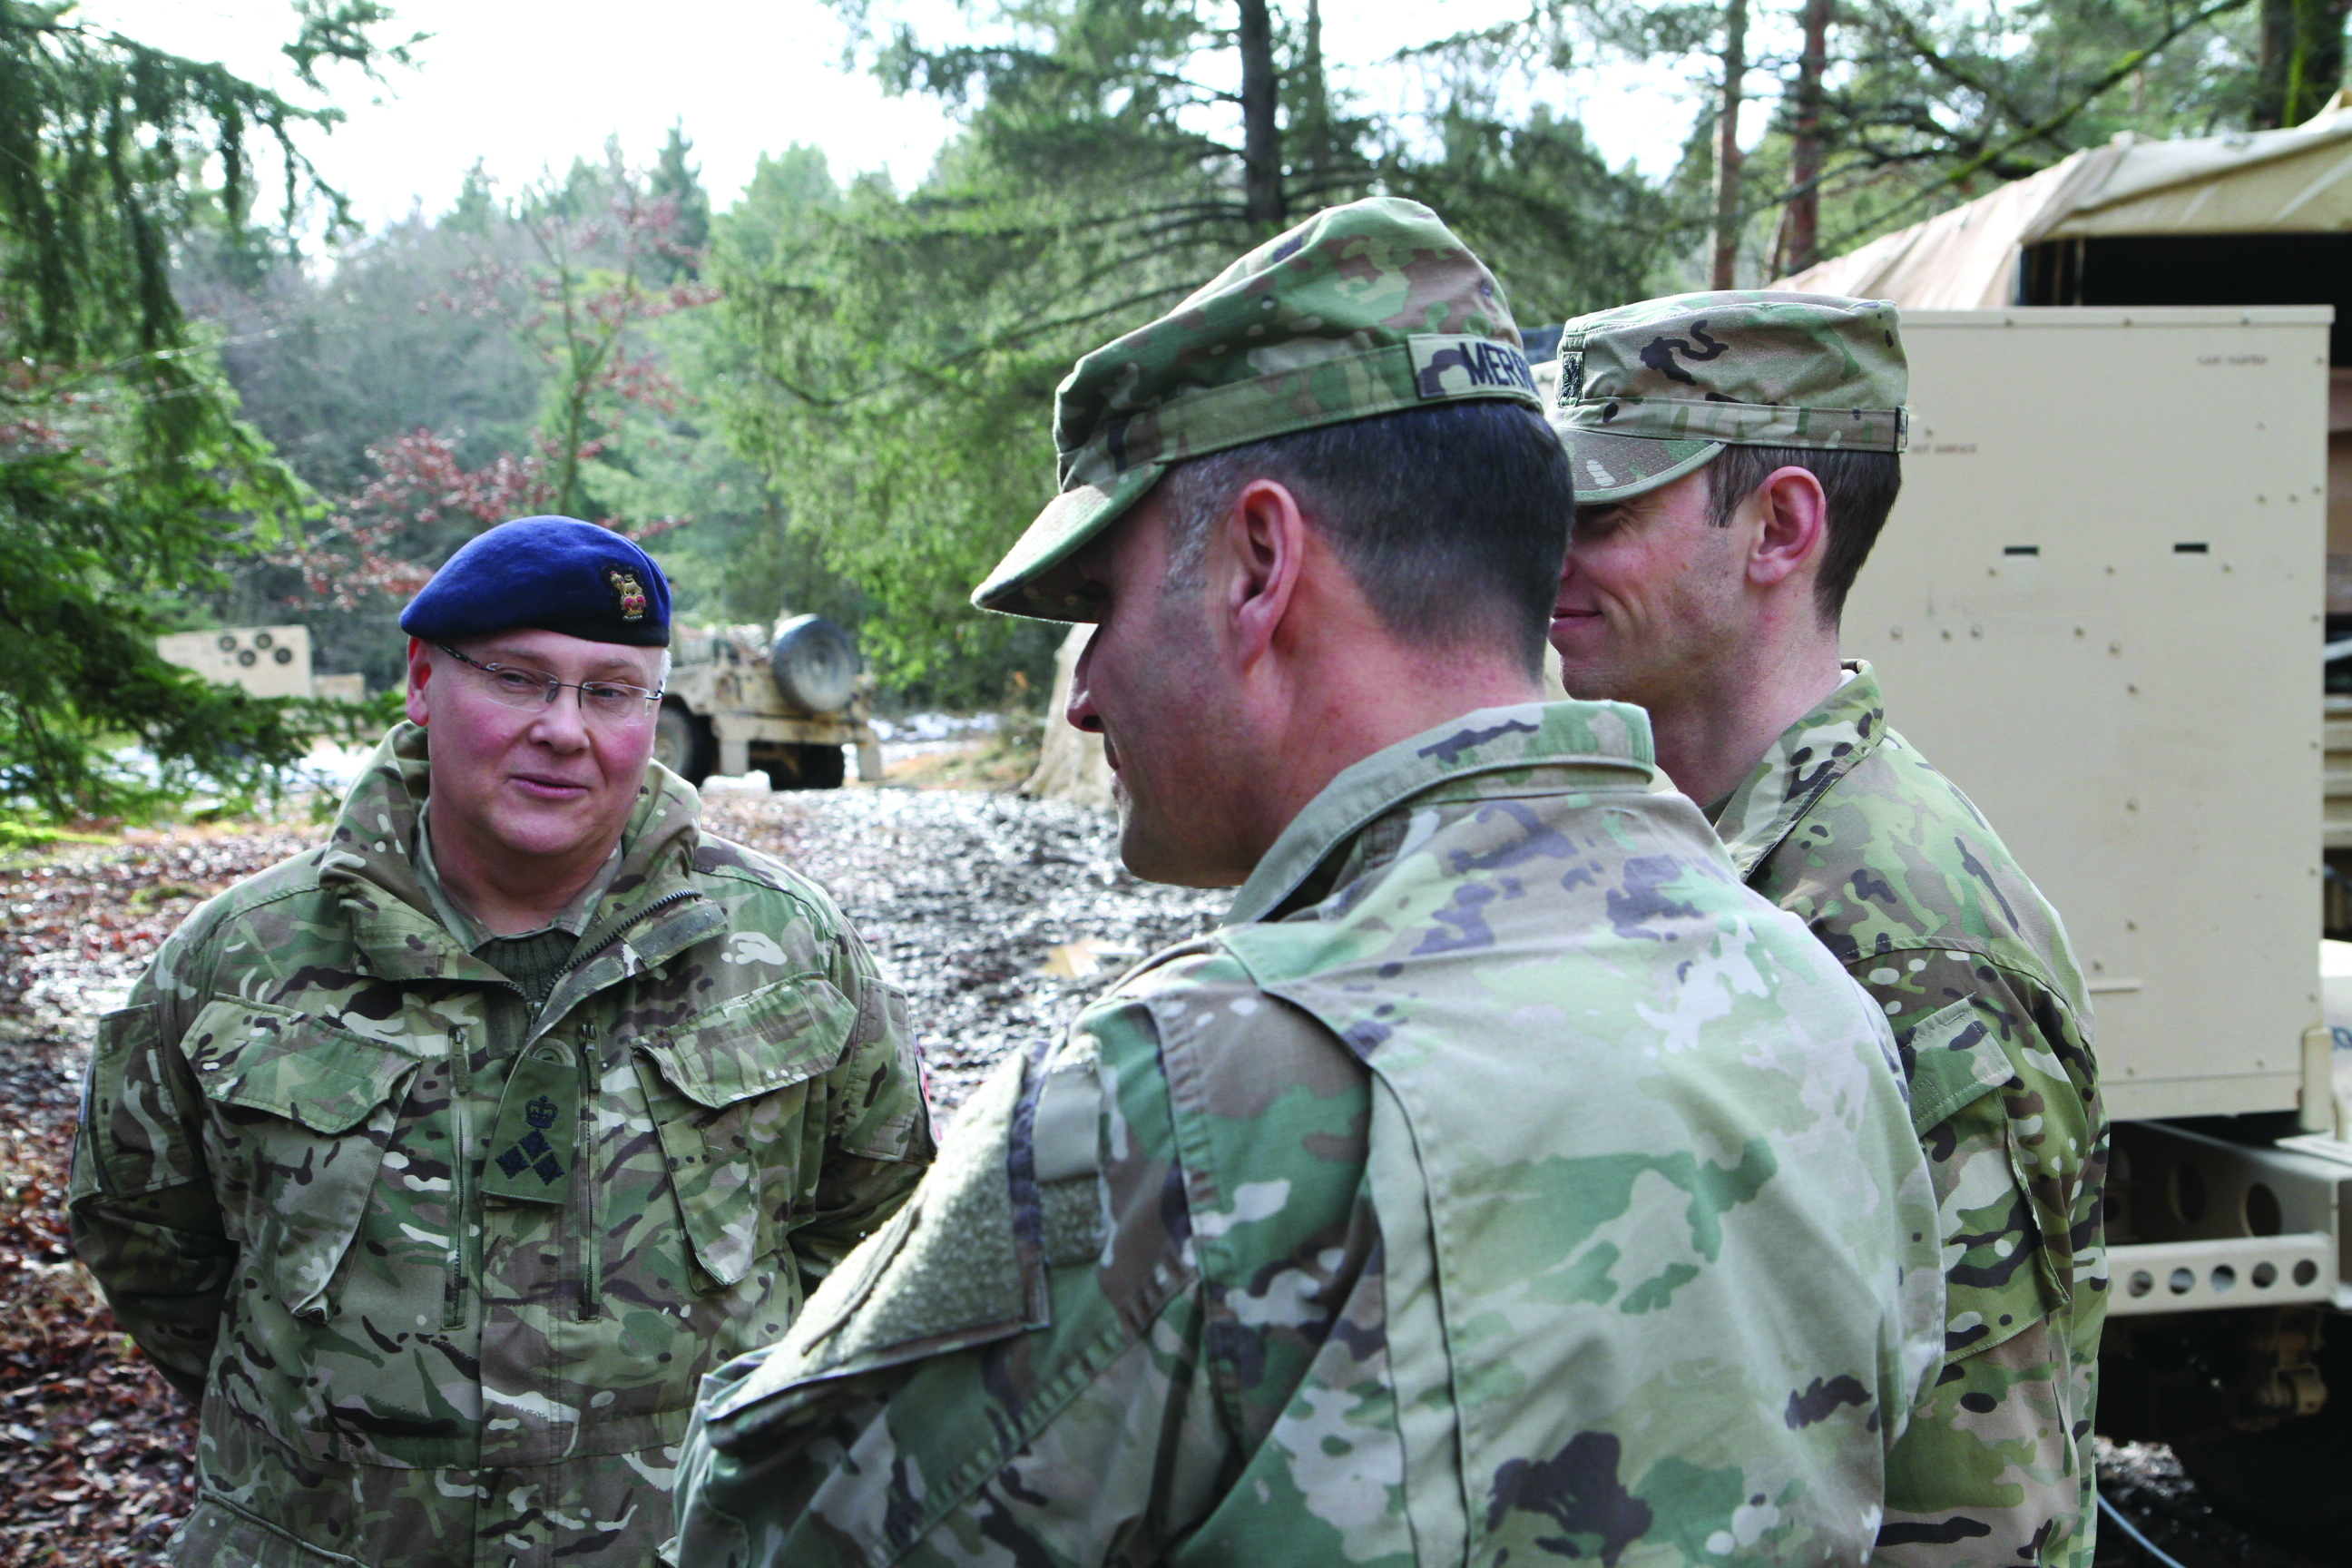 British Brigadier Darren Stewart, Head of Operational
        Law at British Army Headquarters, visited the U.K.
        Legal Advisers supporting 2nd Brigade Combat
        Team, 1st Cavalry Division, during Combined Resolve
        XIII at the Joint Multinational Readiness Center at
        Hohenfels, Germany in January 2020. Also pictured:
        COL J.J. Merriam & LTC Justin Marchesi, U.S. Army
        judge advocates. (Credit: SGT Fiona Berndt)